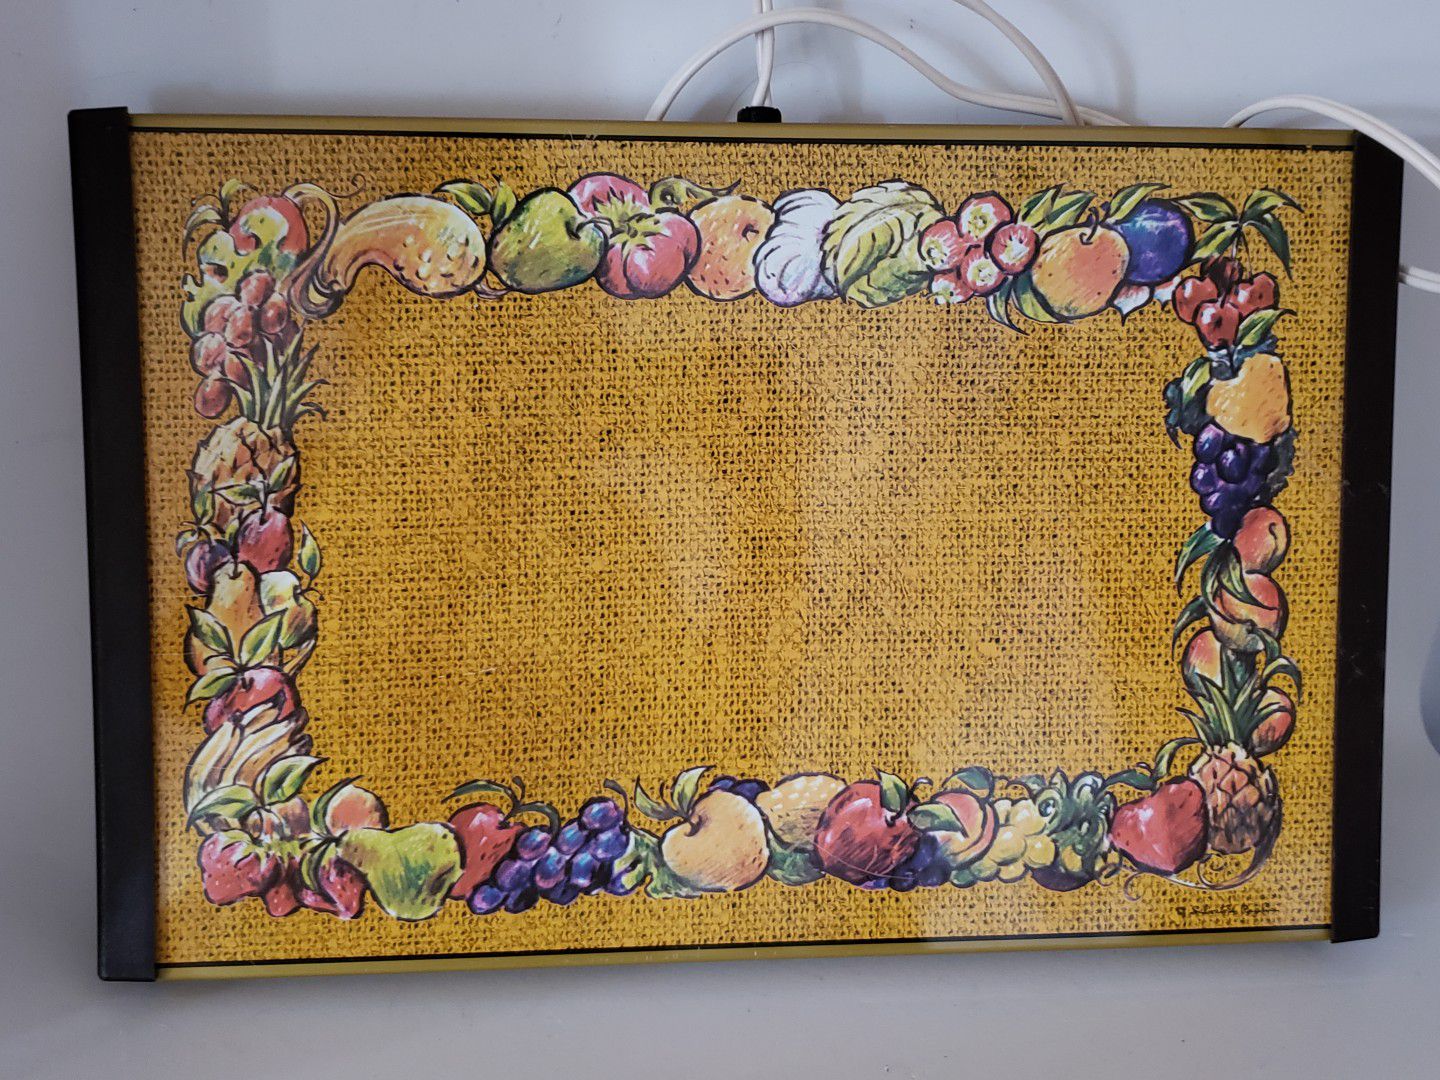 Awesome colorful vintage warming tray